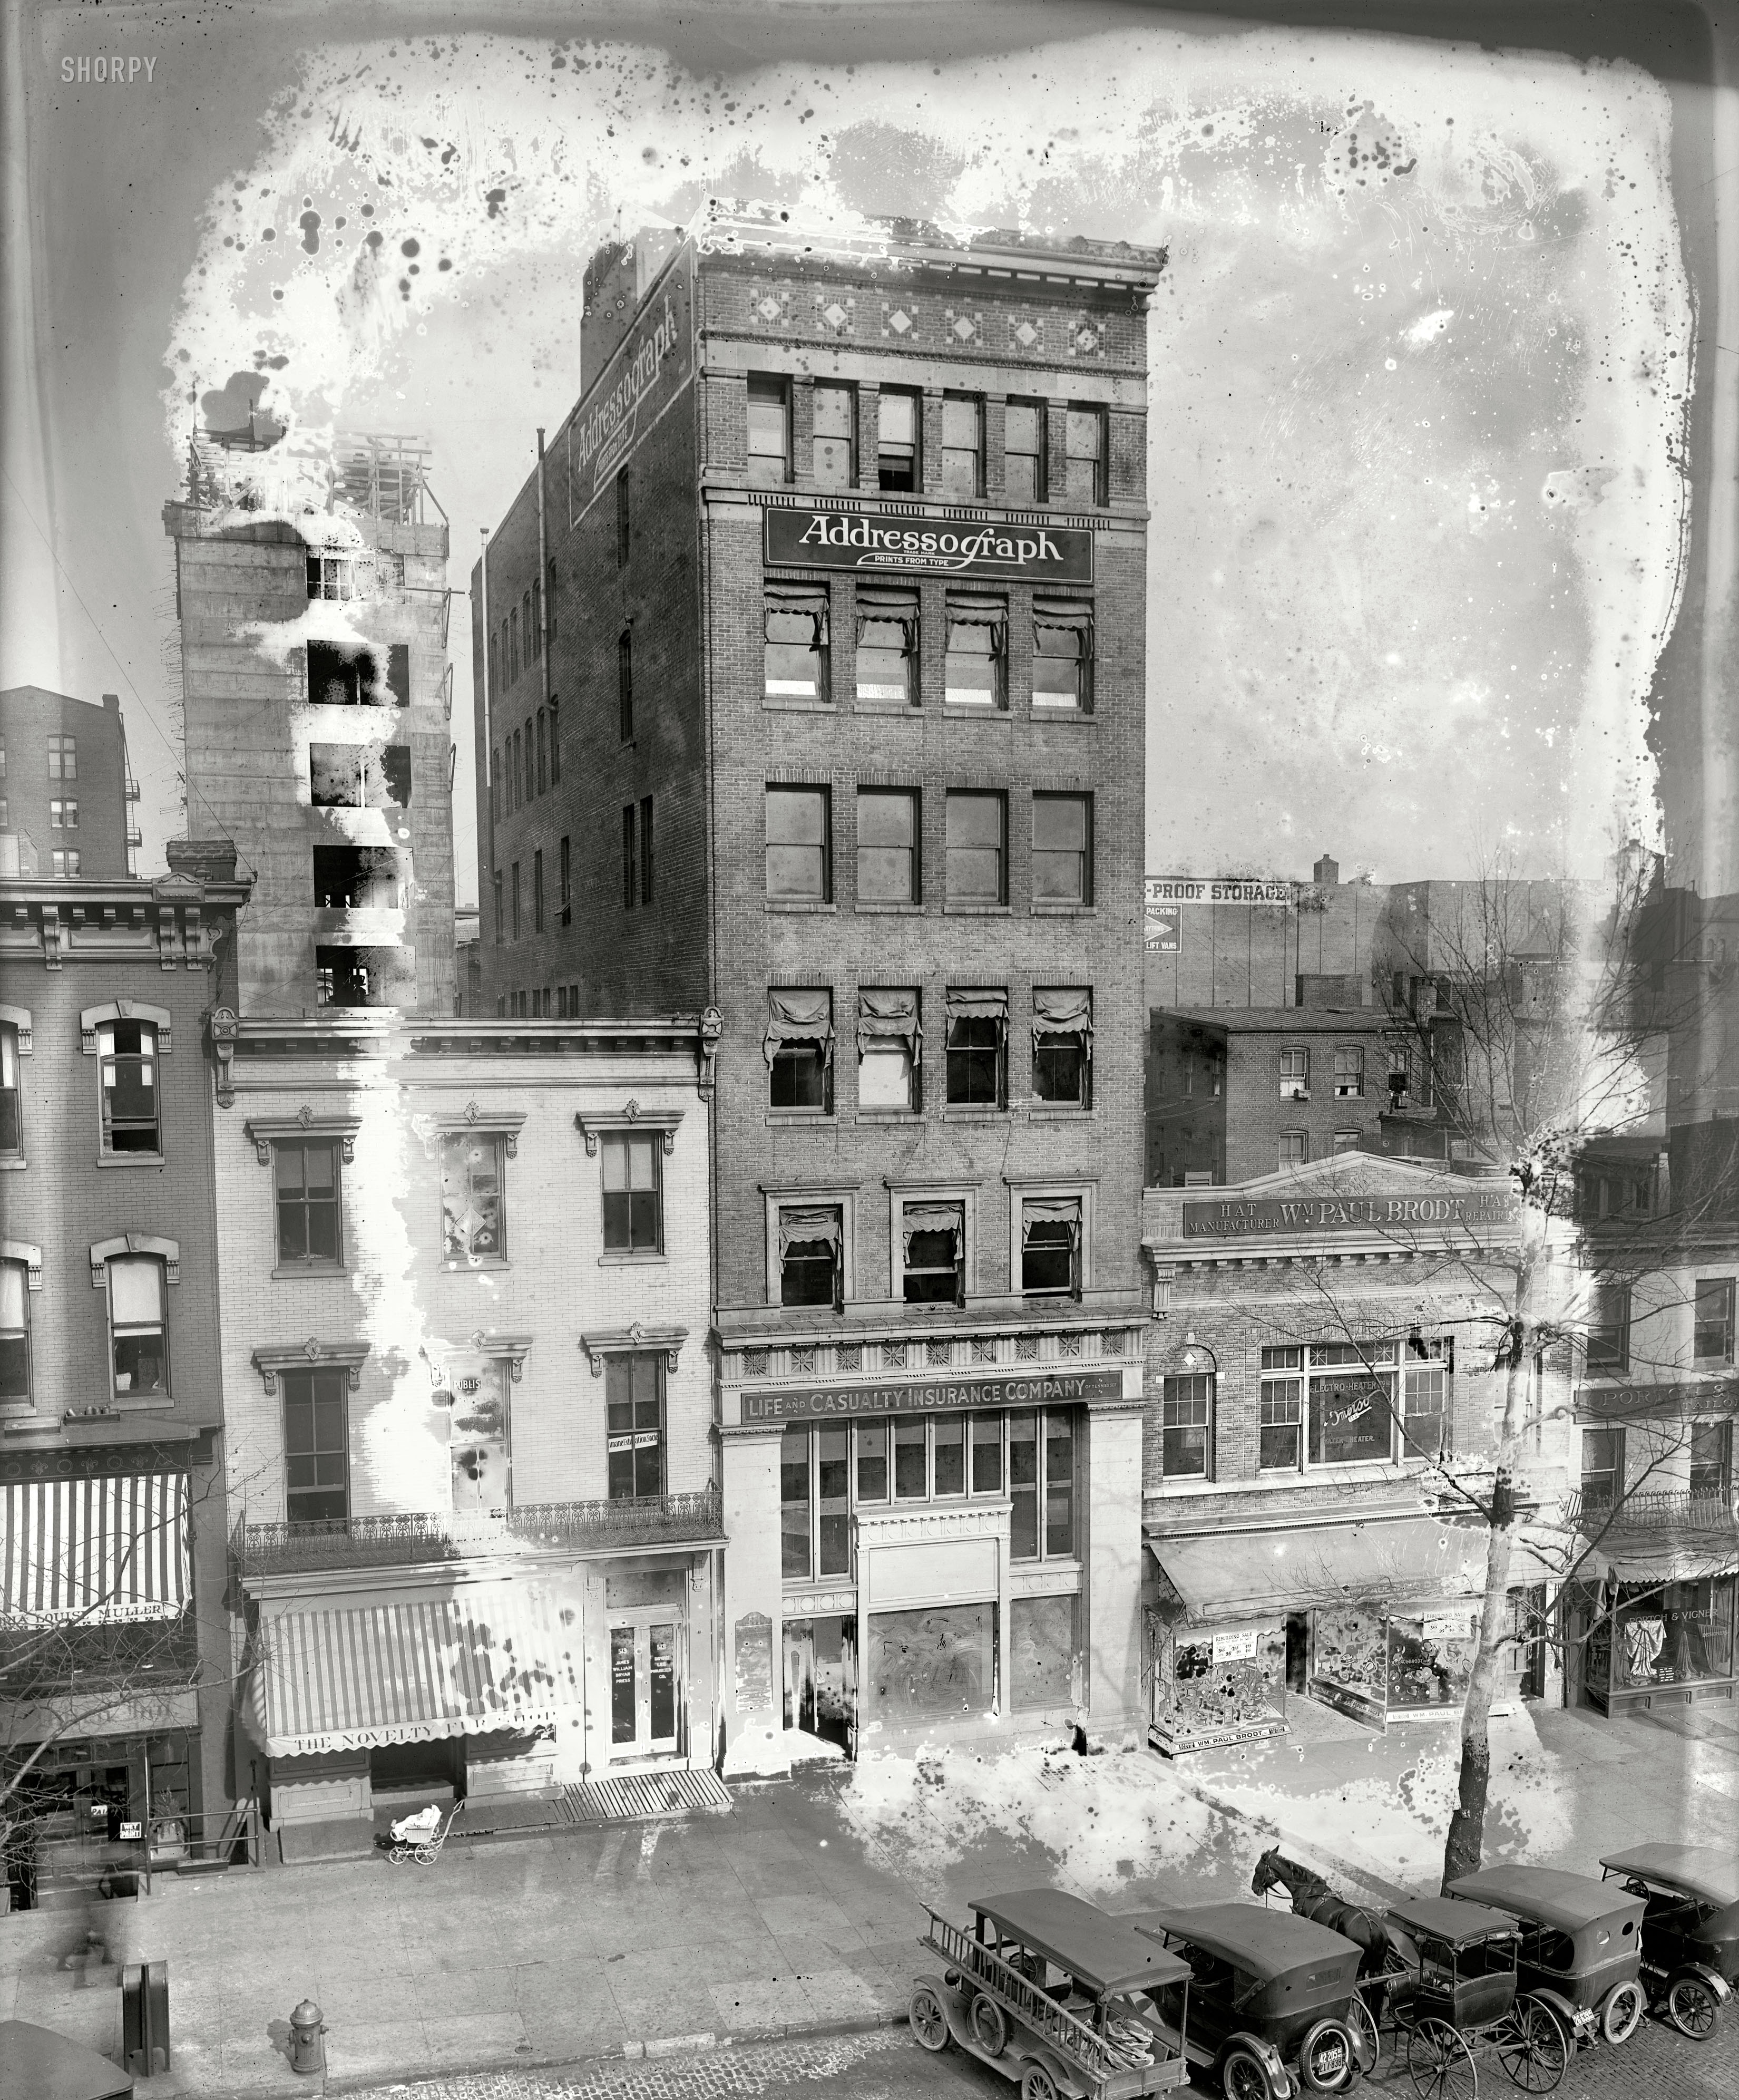 Washington, D.C., circa 1923. "Addressograph, 11th Street." I had written this off as too moldy to post, then saw the horse parked among the cars and baby parked in front of the fur store (is one baby-sitting the other?) and decided they deserved their 15 minutes of fame. National Photo glass negative. View full size.